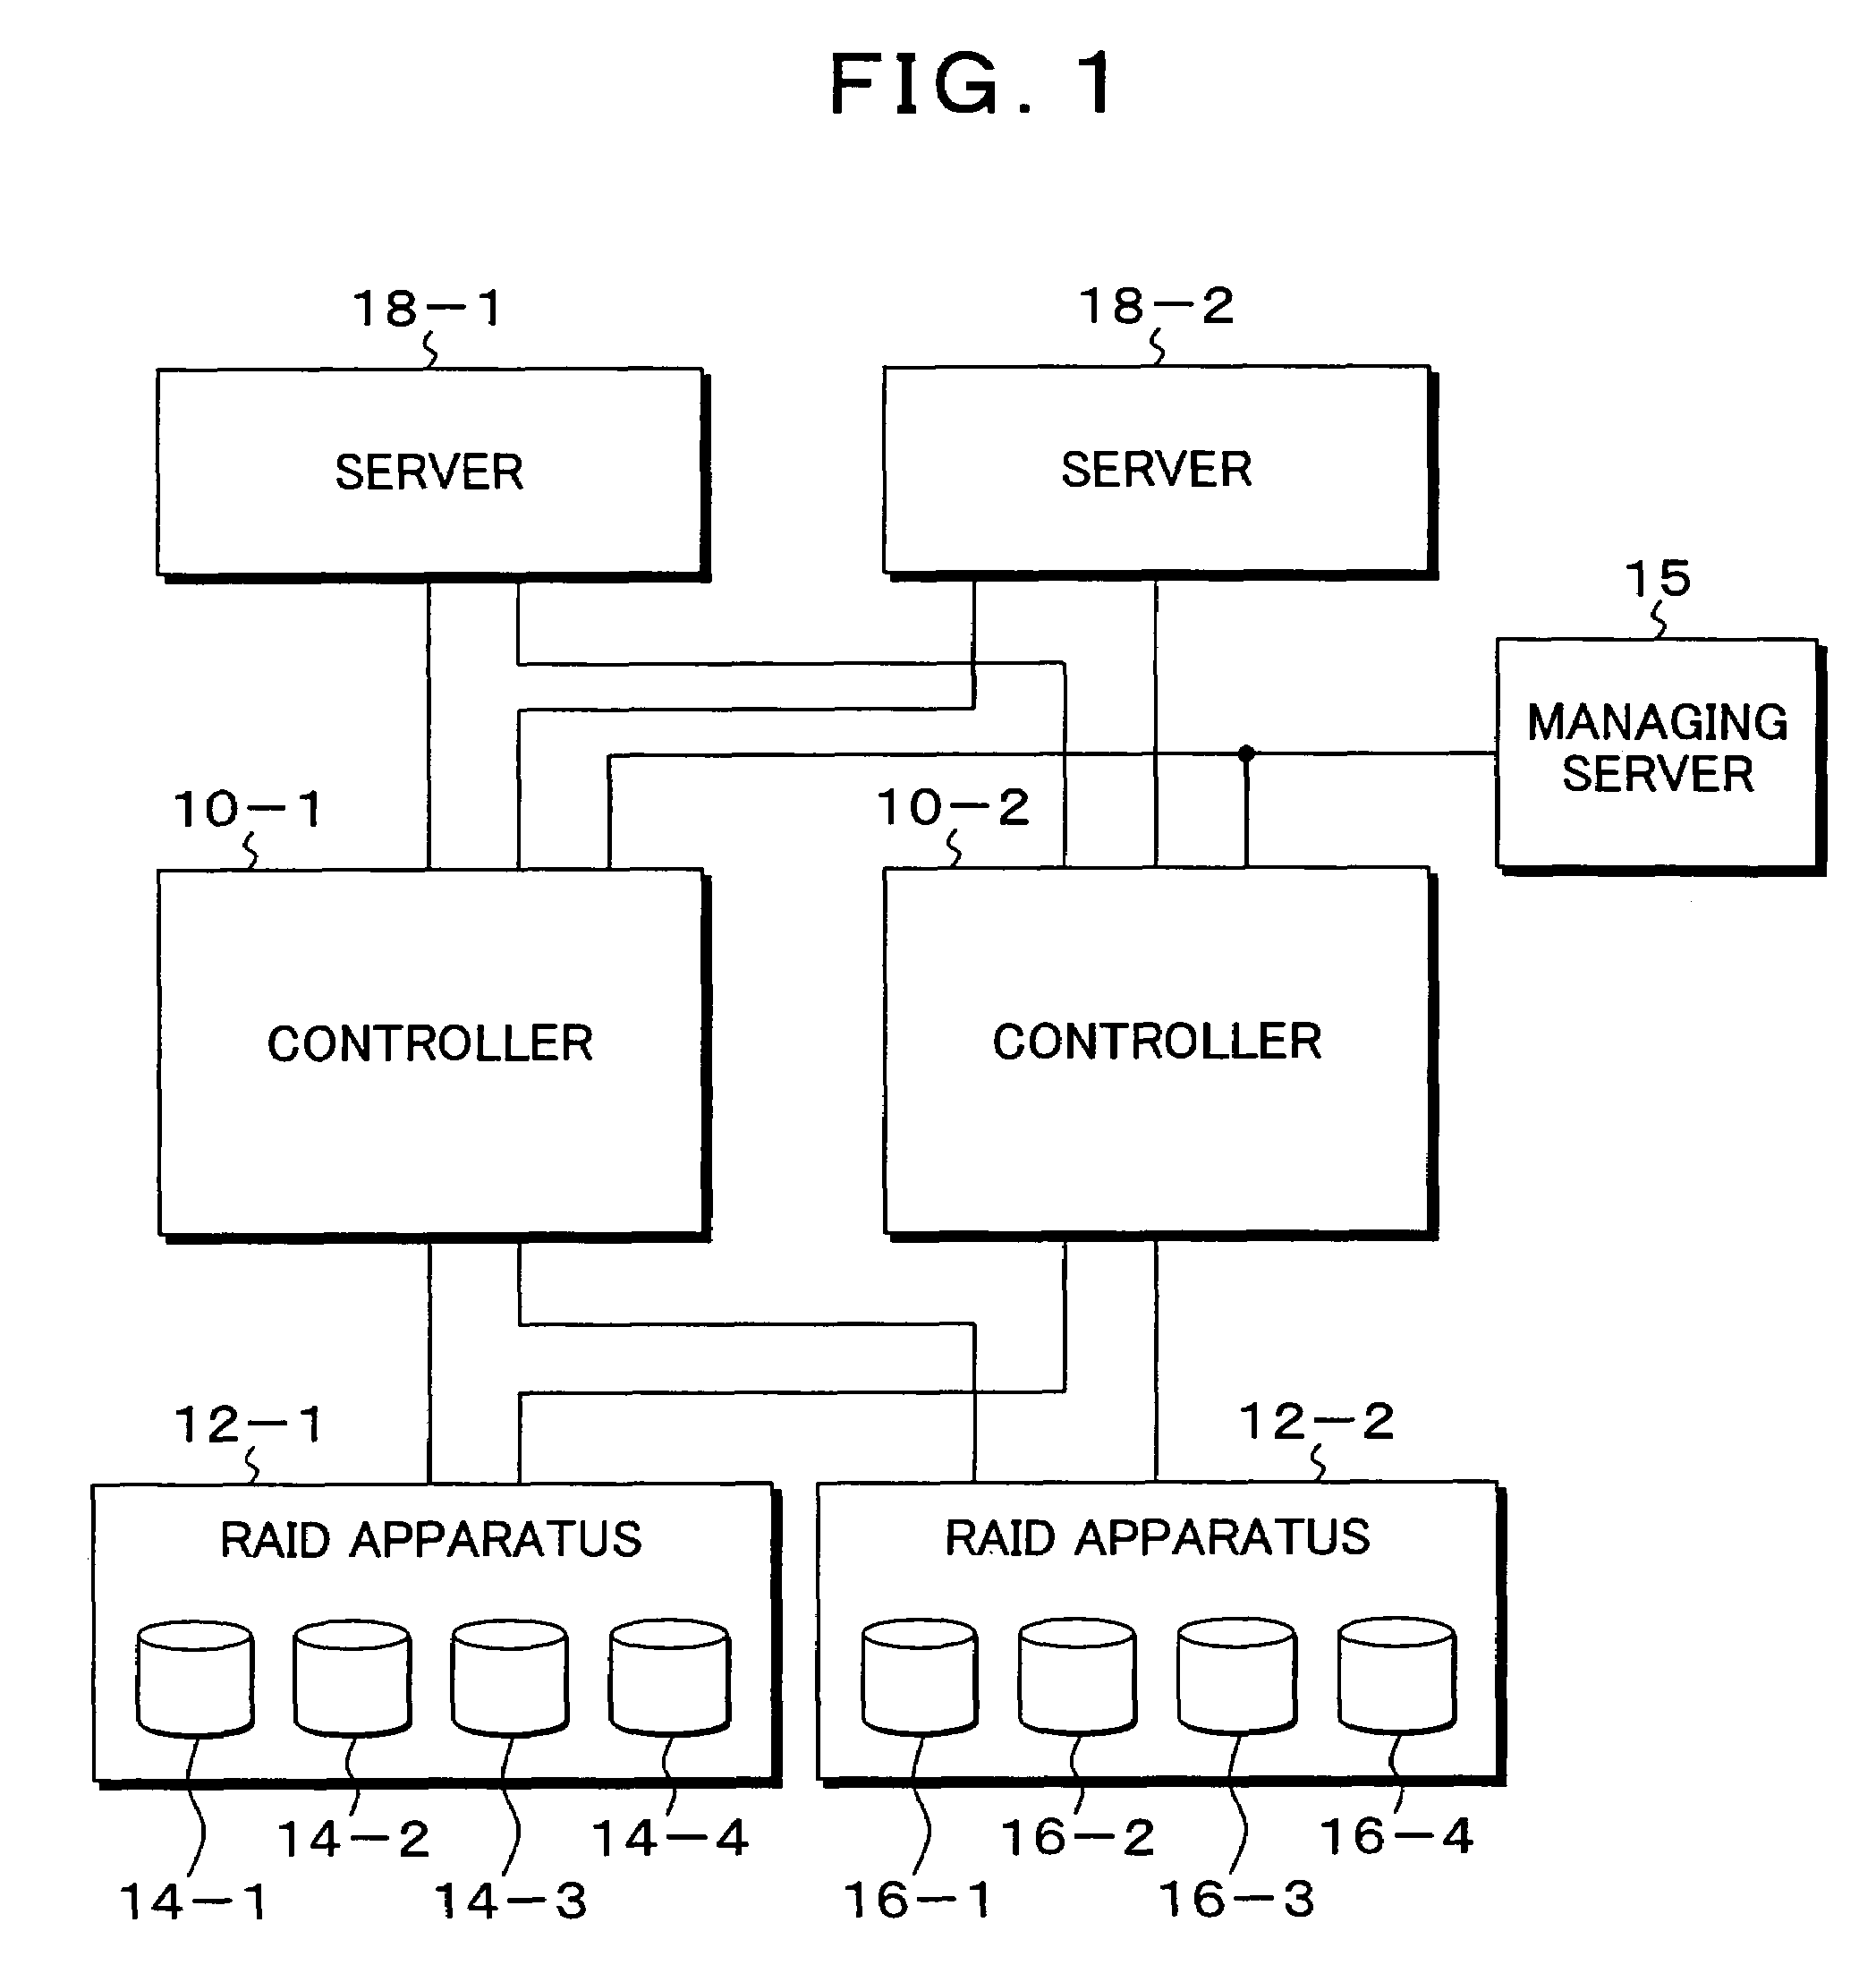 Program, method and apparatus for virtual storage management that assigns physical volumes managed in a pool to virtual volumes